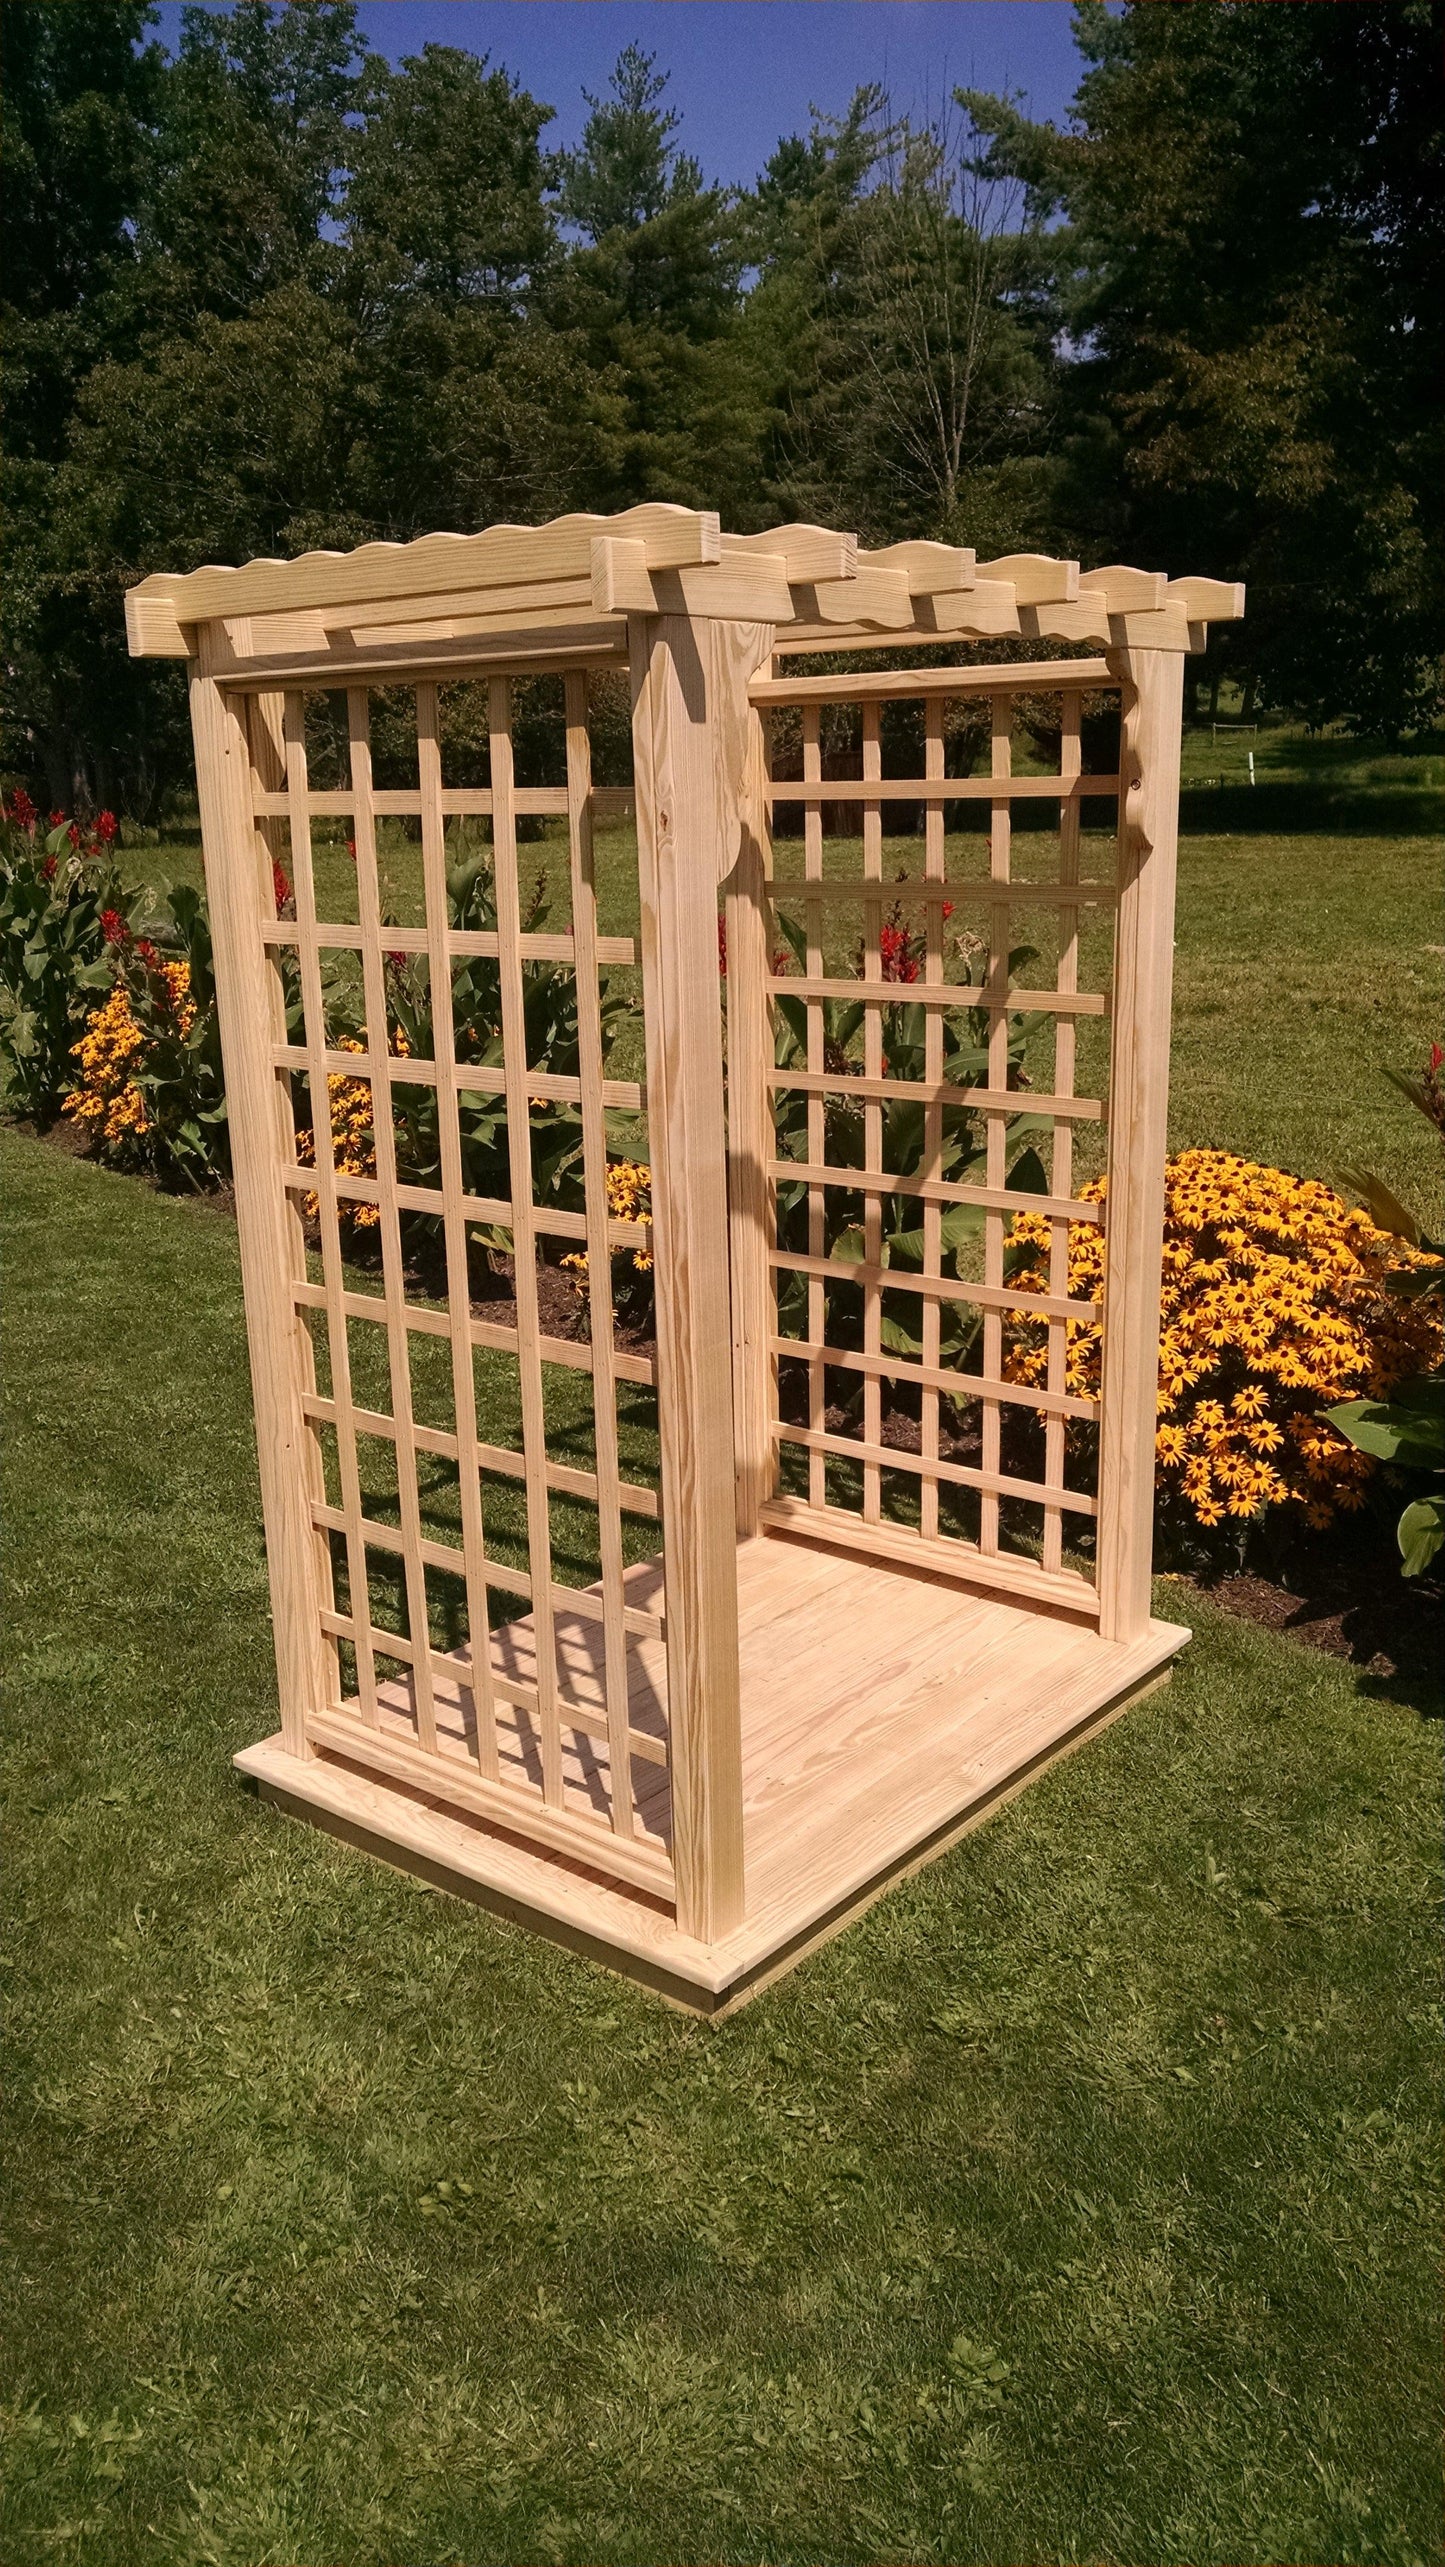 A&L FURNITURE CO. 5' Lexington Pressure Treated Pine Arbor & Deck - LEAD TIME TO SHIP 10 BUSINESS DAYS